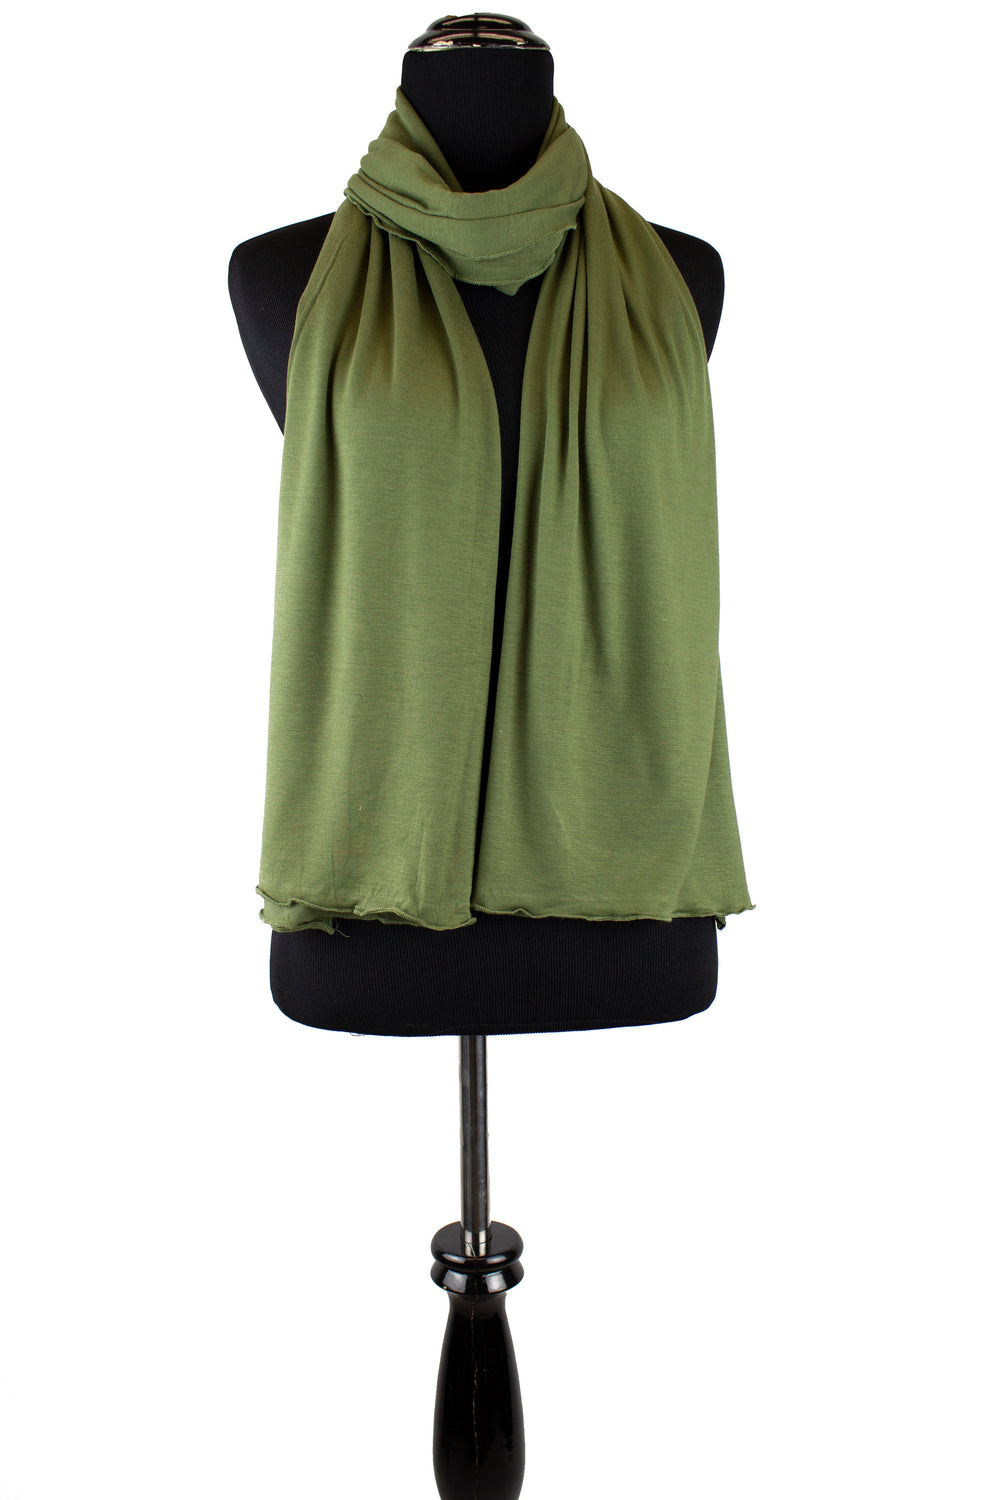 jersey hijab in light olive green